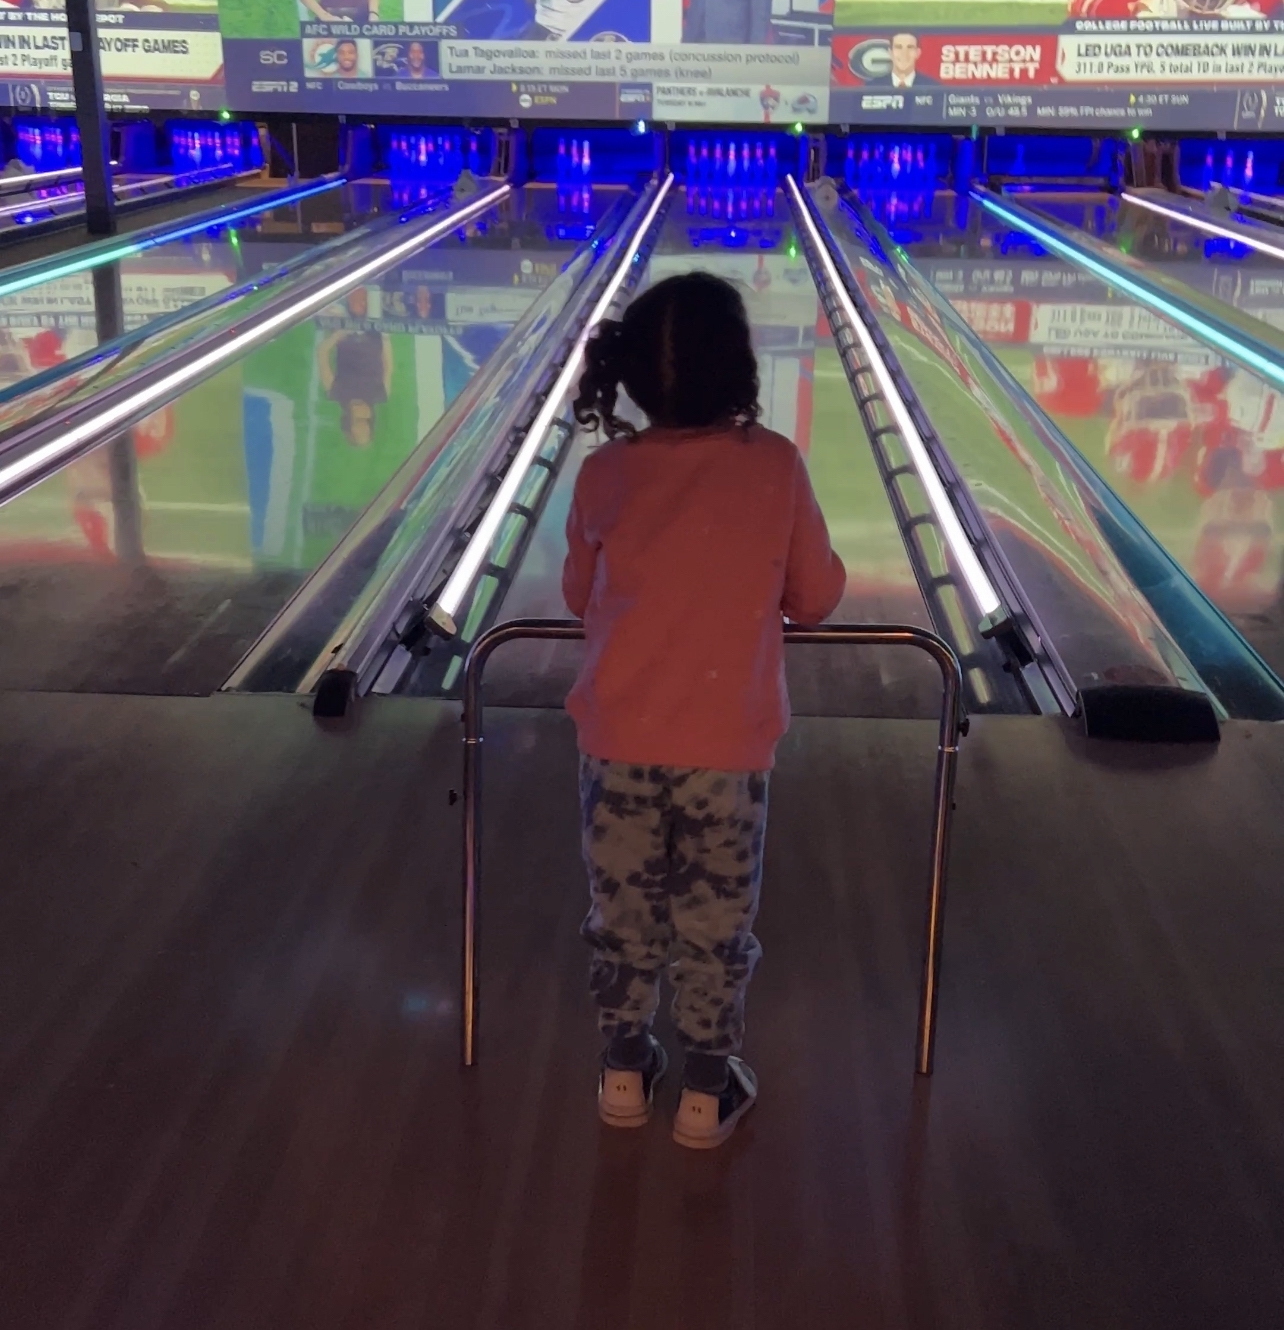 Bowling Fun for Kids: Discover the Nationwide Program that Offers Two Free Games per Day!